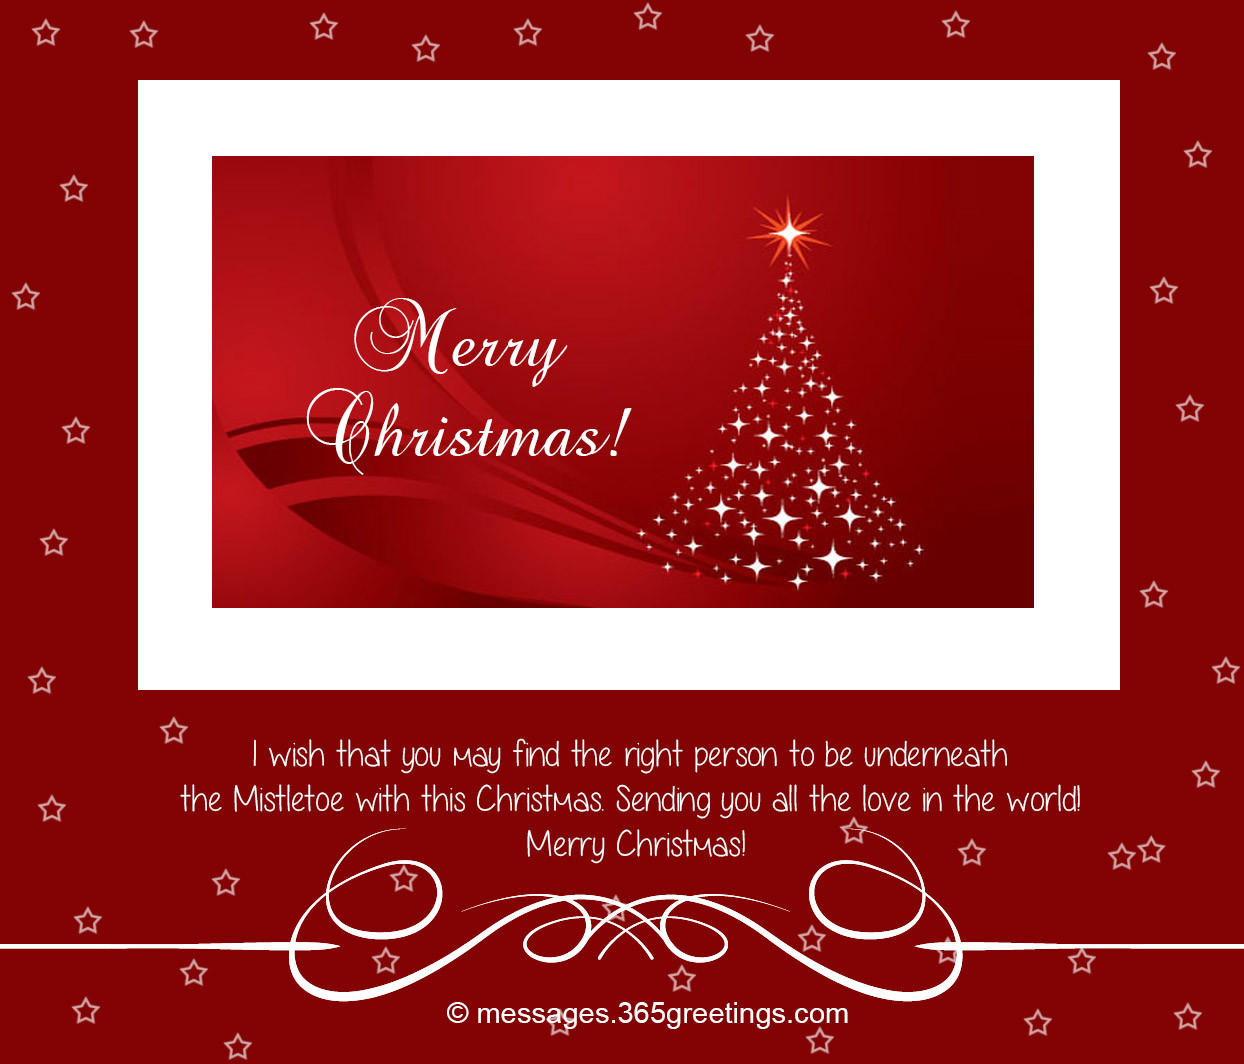 Quote For Christmas Cards
 Best Christmas Card Sayings and Greetings 365greetings